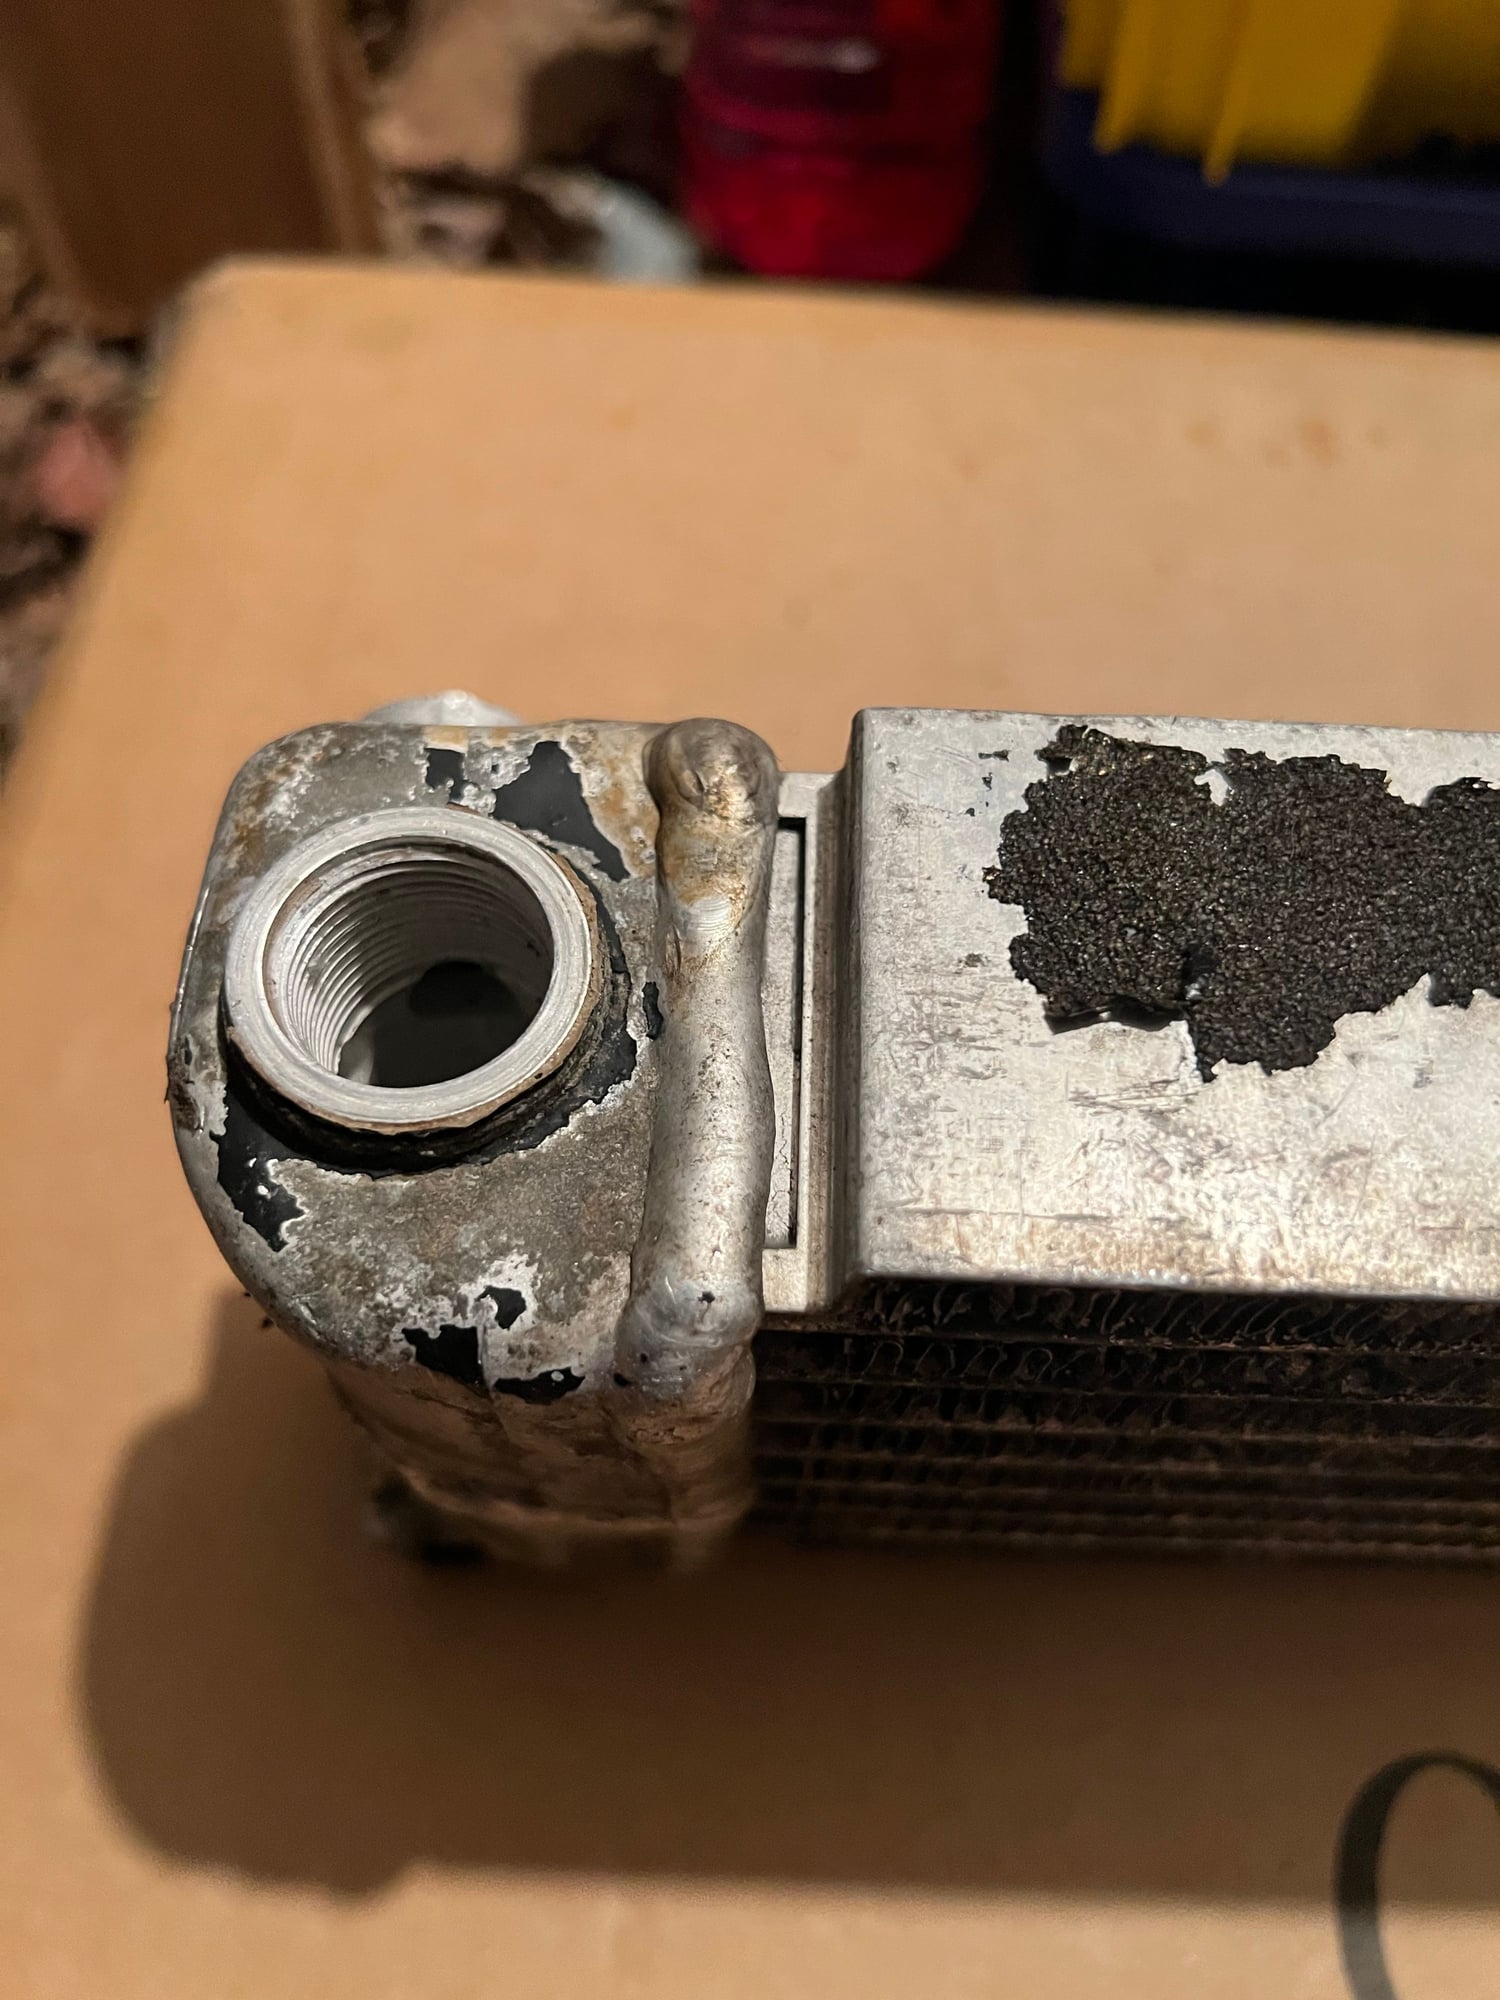 Miscellaneous - 1982-1985 oil cooler. $250 with shipping. No leaks! - Used - 1982 to 1985 Mazda RX-7 - Portland, OR 97223, United States